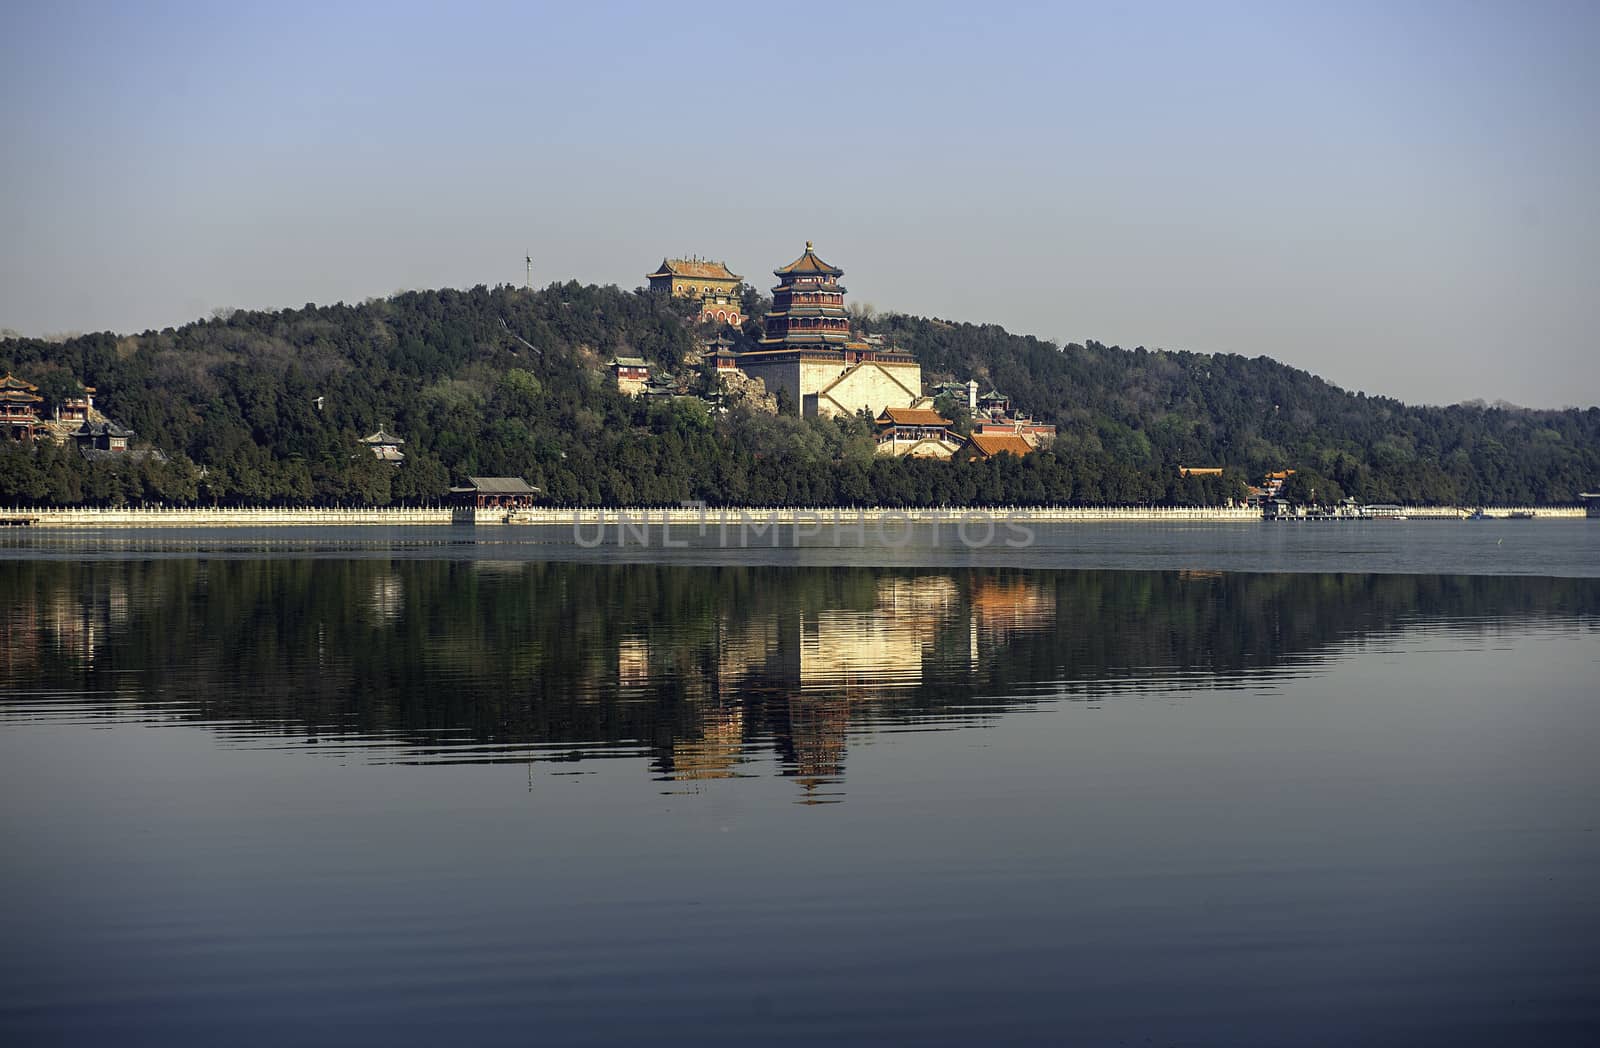 The Summer palace under the sunshine in Beijing, China